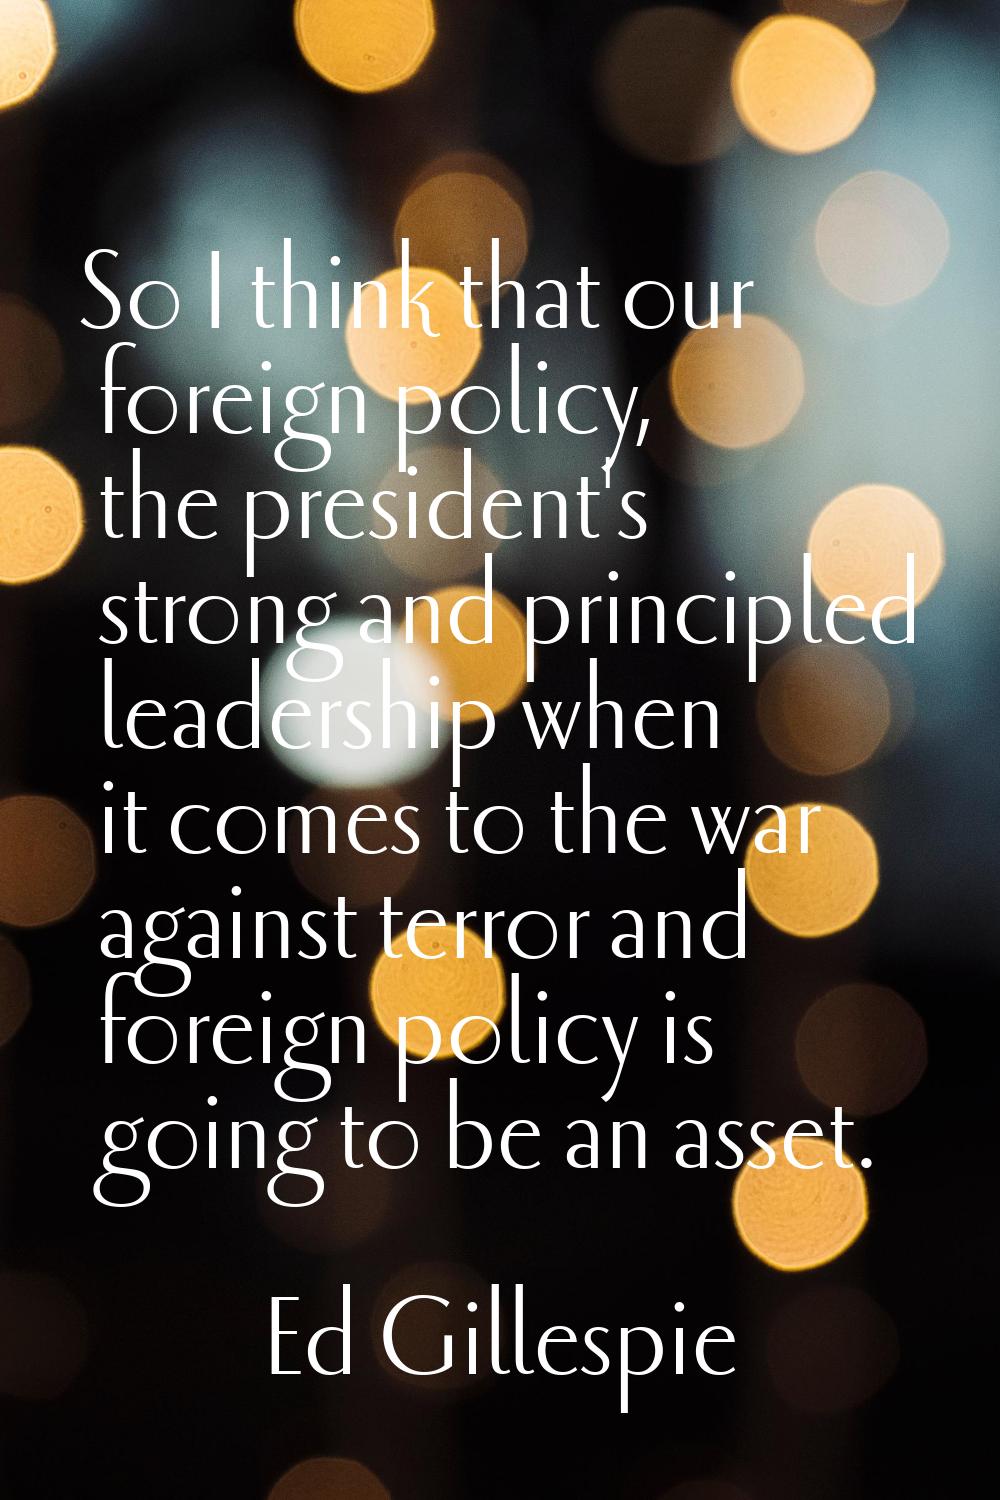 So I think that our foreign policy, the president's strong and principled leadership when it comes 